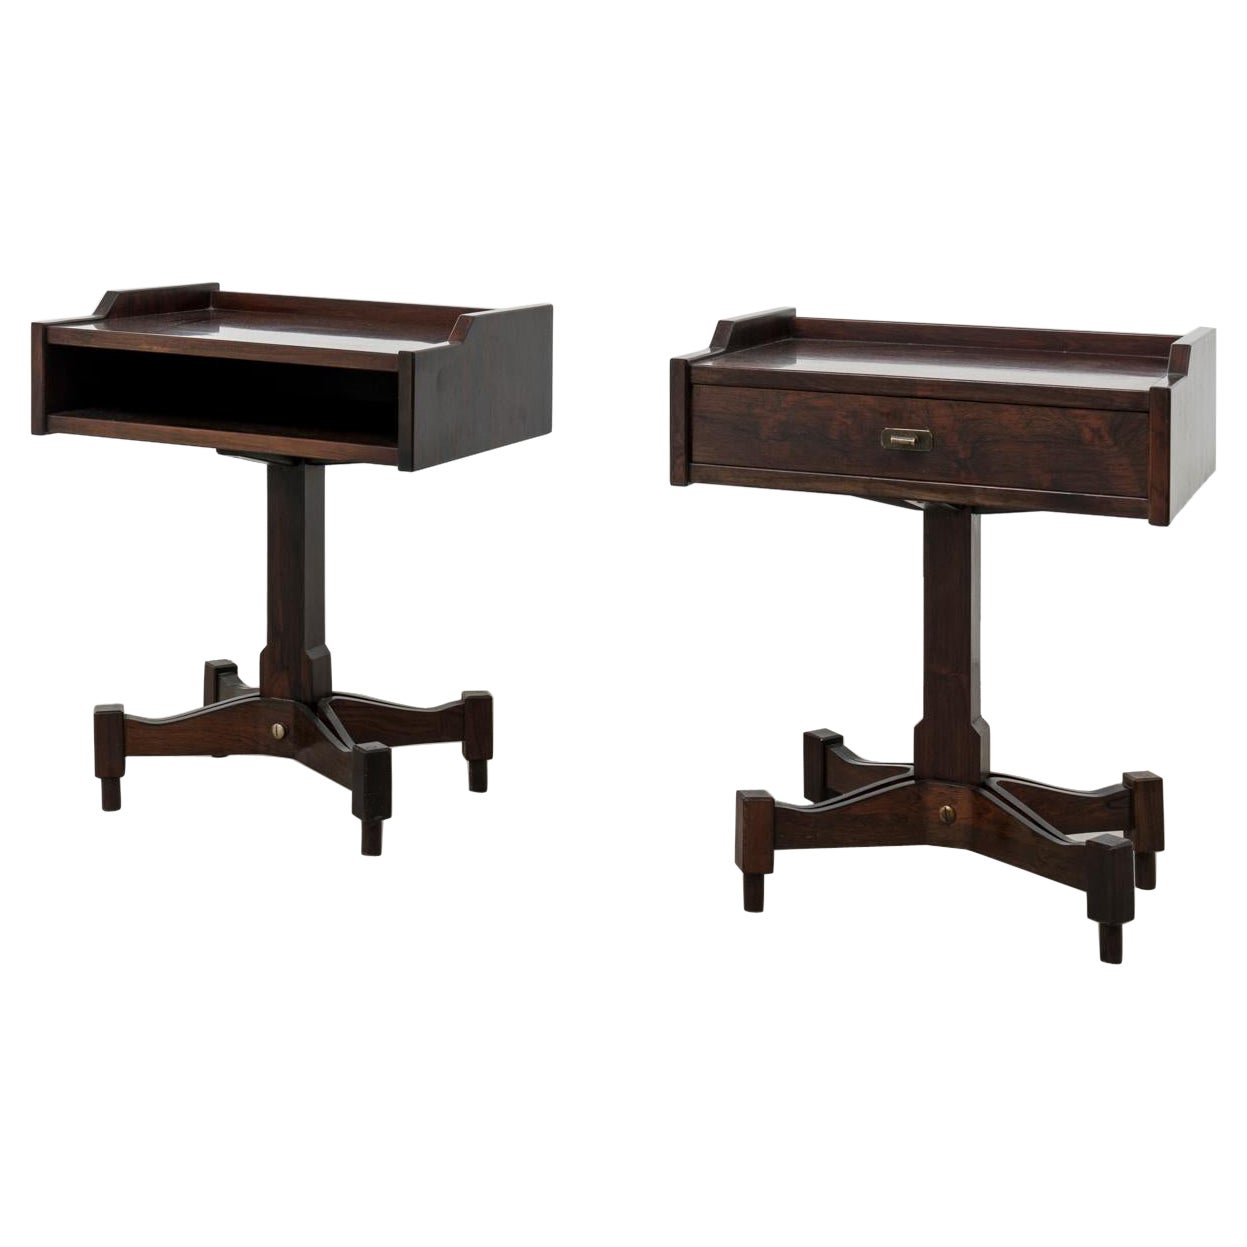 Pair of rosewood nightstands SC-50 by Claudio Salocchi for Sormani 1960s For Sale